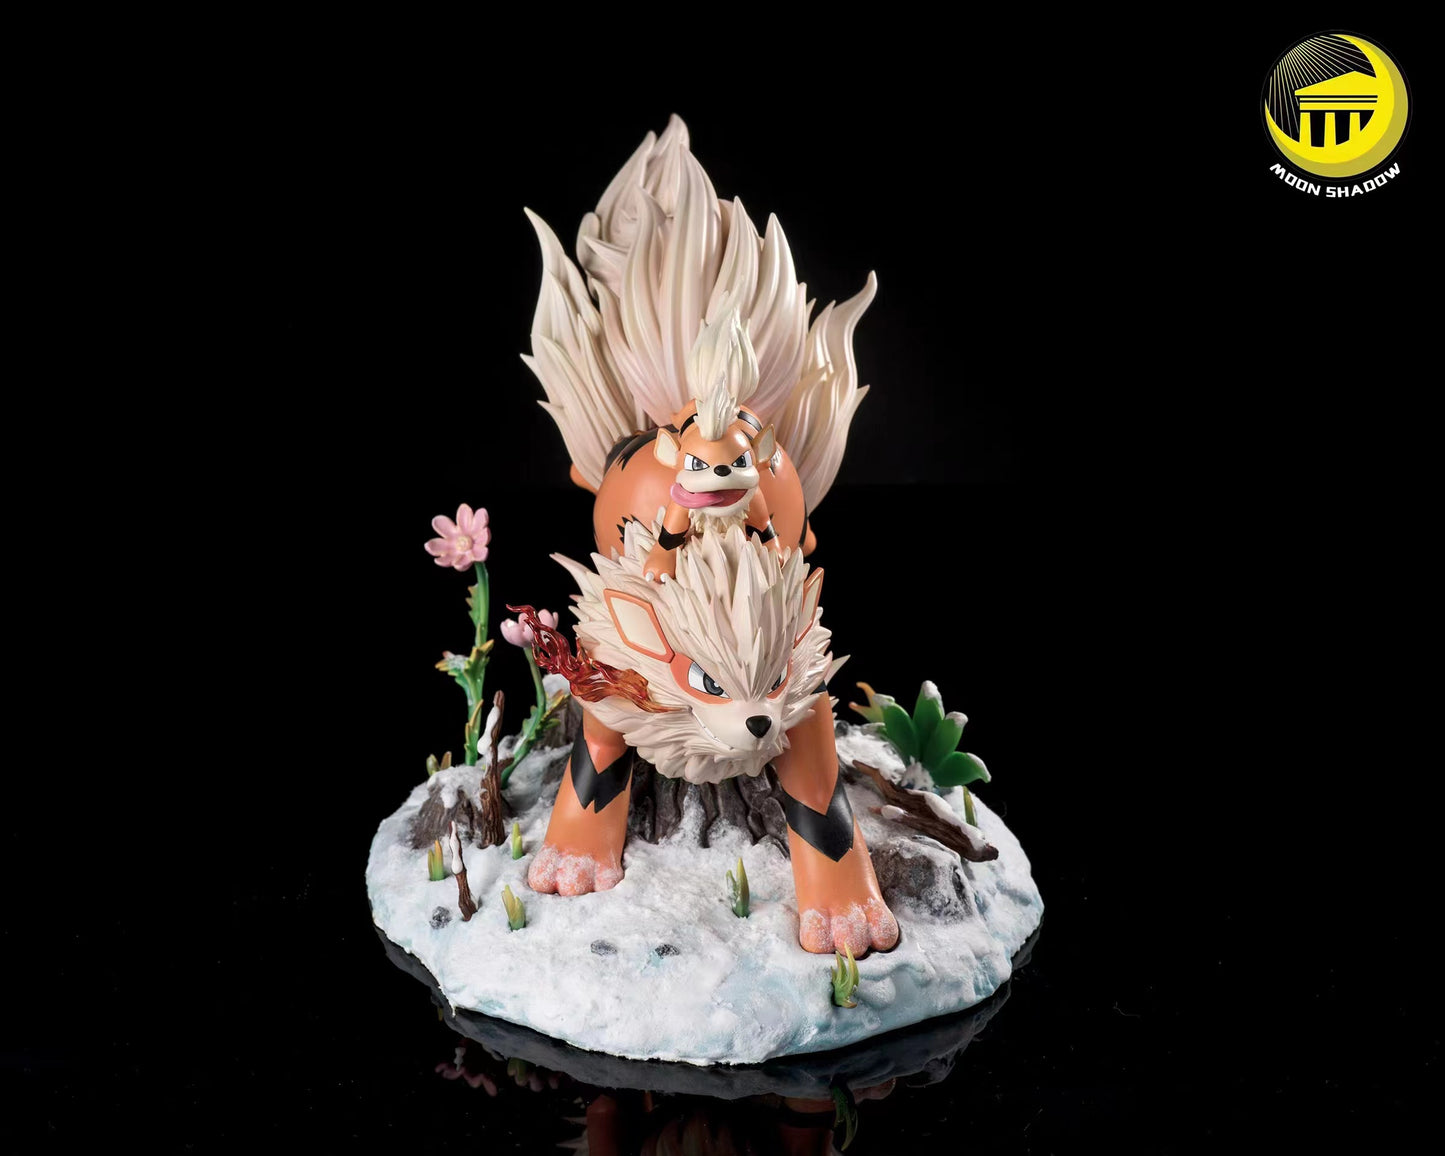 MOON SHADOW STUDIO – POKEMON: ARCANINE FAMILY [SOLD OUT]